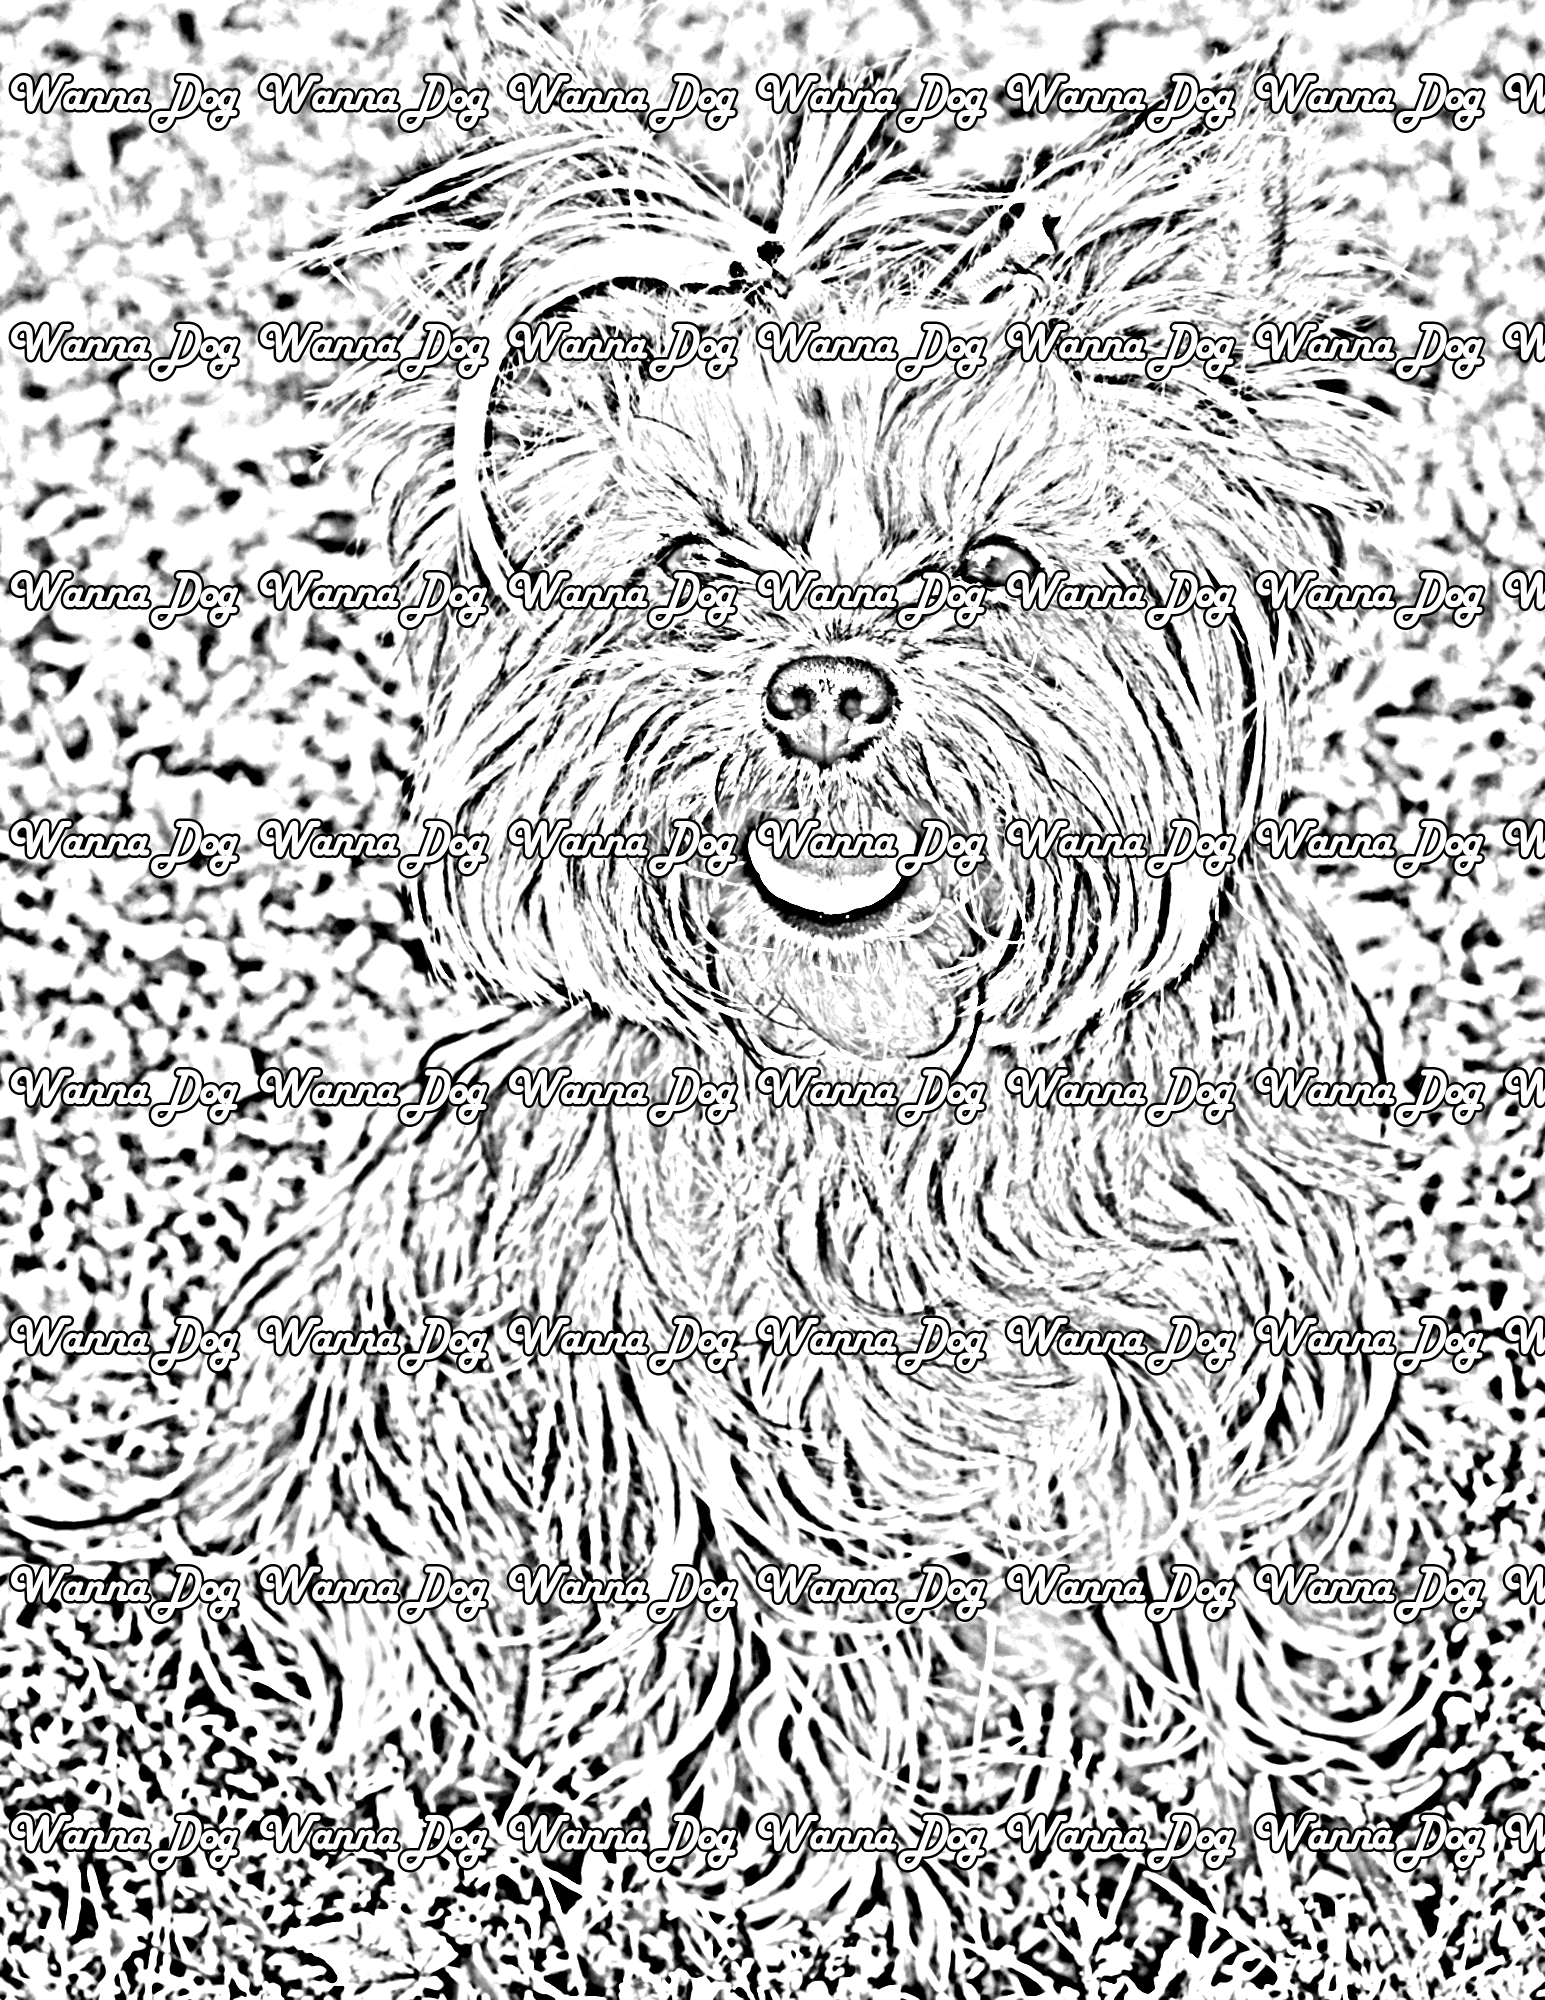 Yorkshire Terrier Coloring Pages of a Yorkshire Terrier with their tongue out